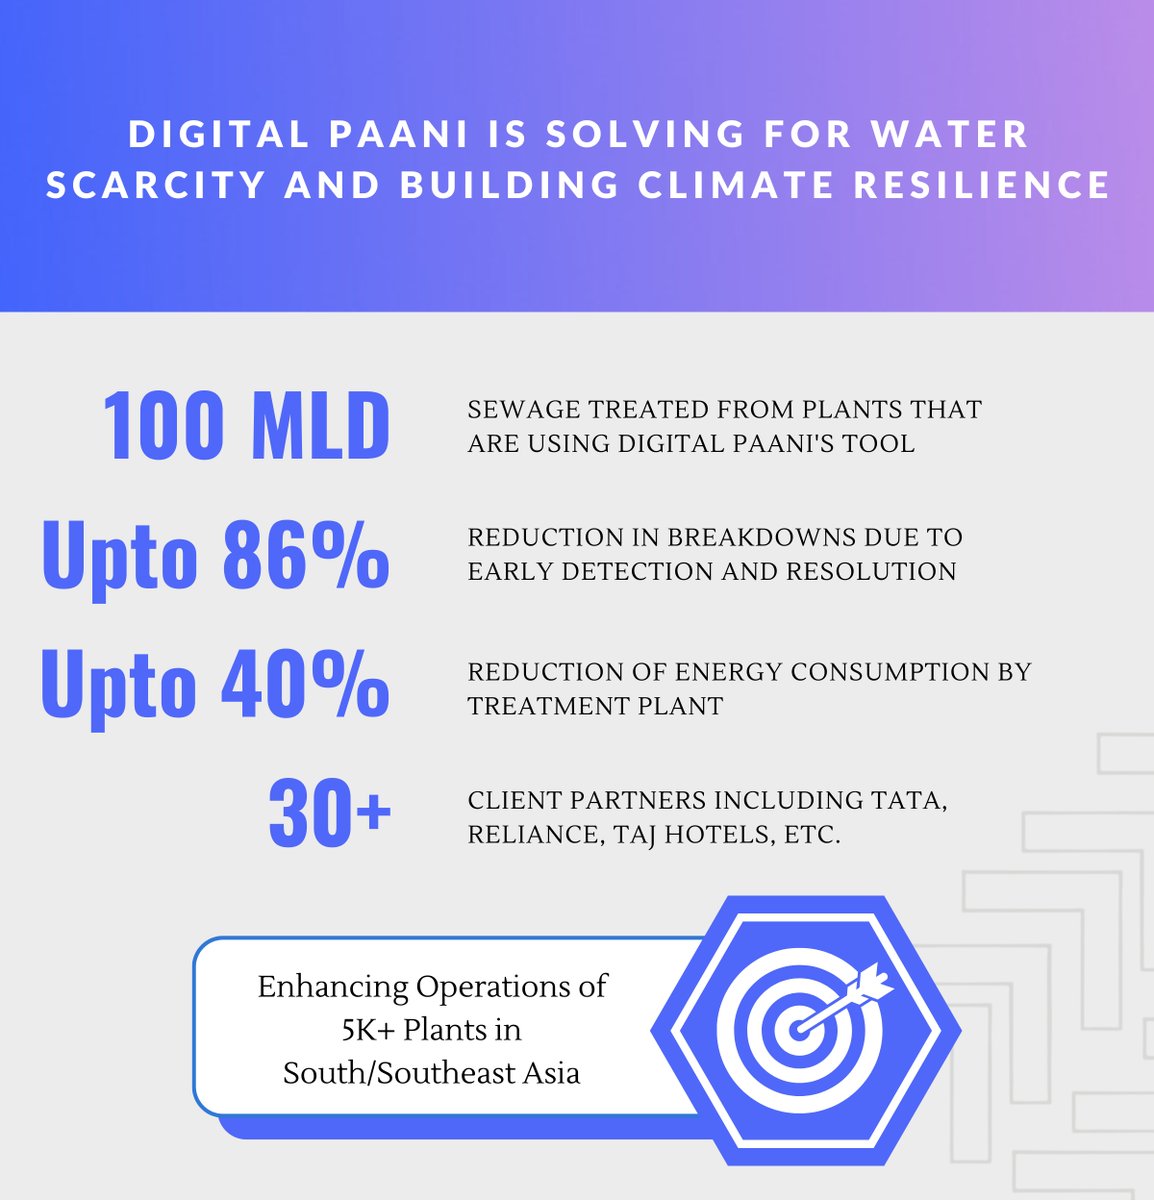 4/ DigitalPaani aims to transform water operations through technology and build the future of water.